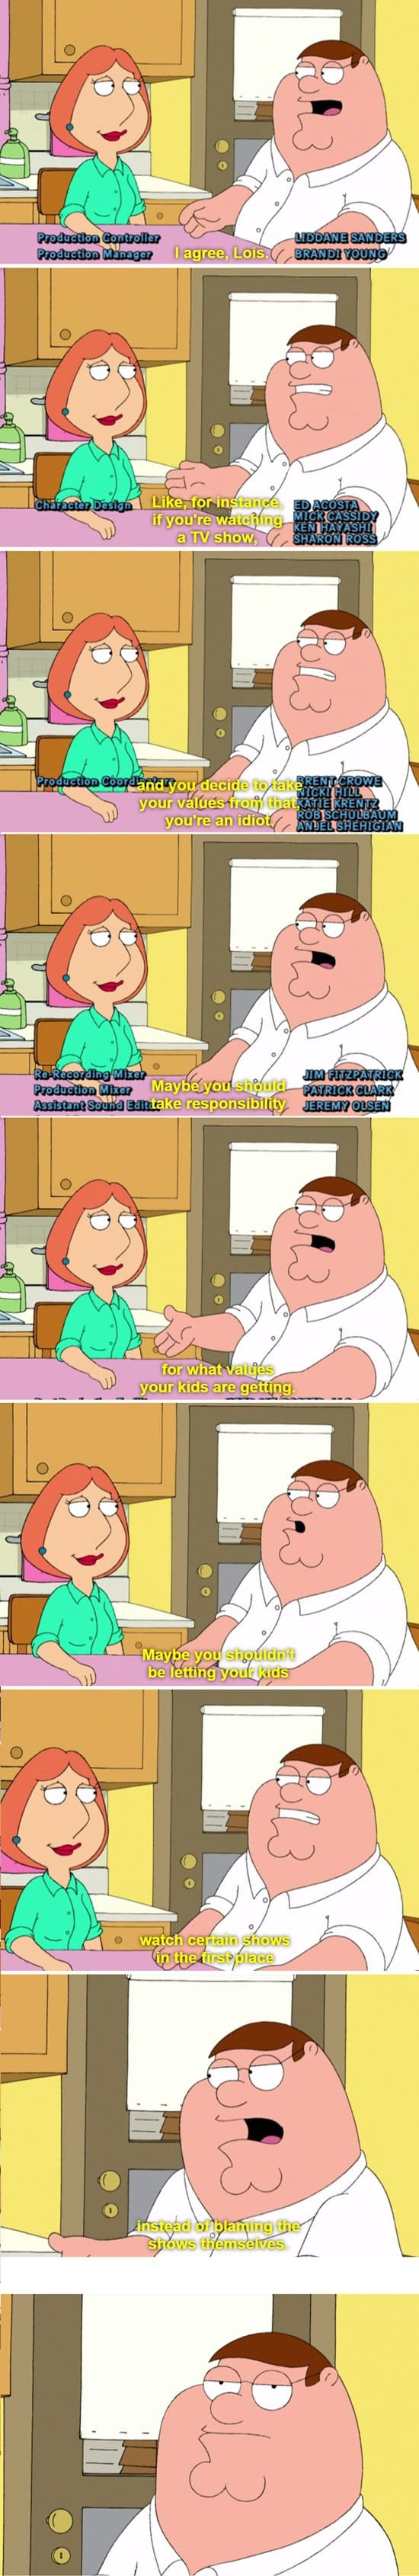 best-family-guy-moments-show